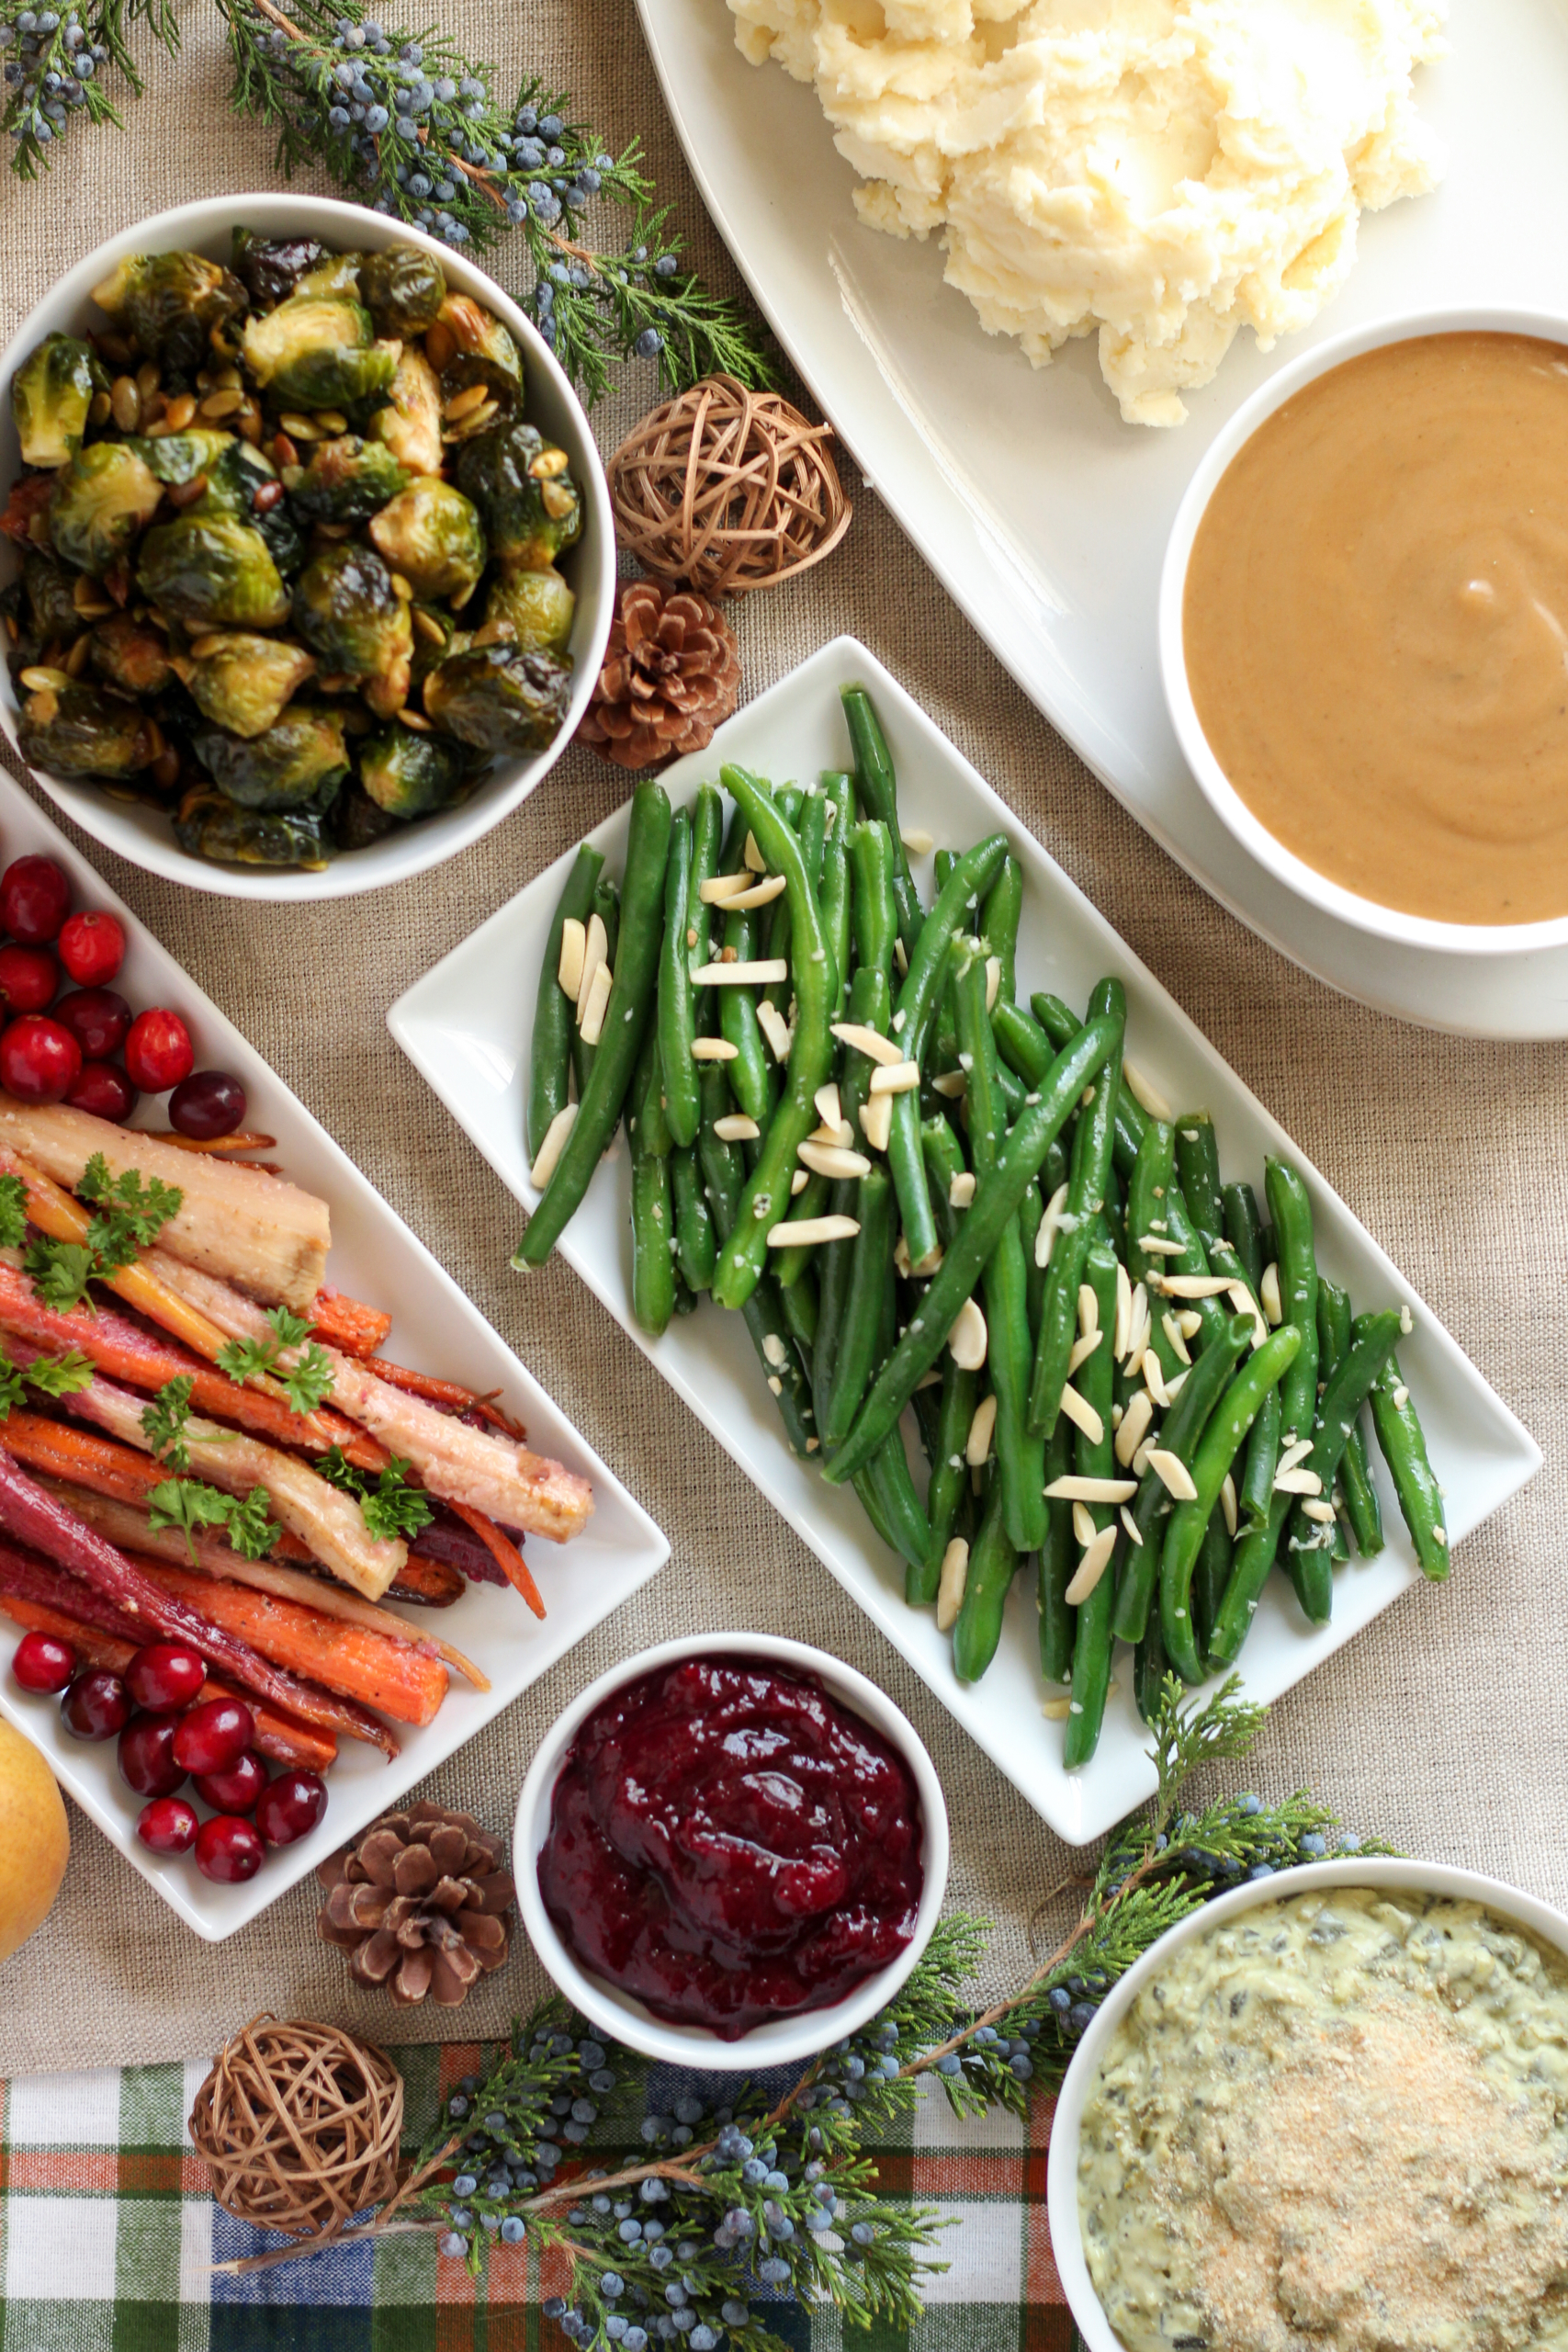 Healthy holiday habits: Tips for eating healthy